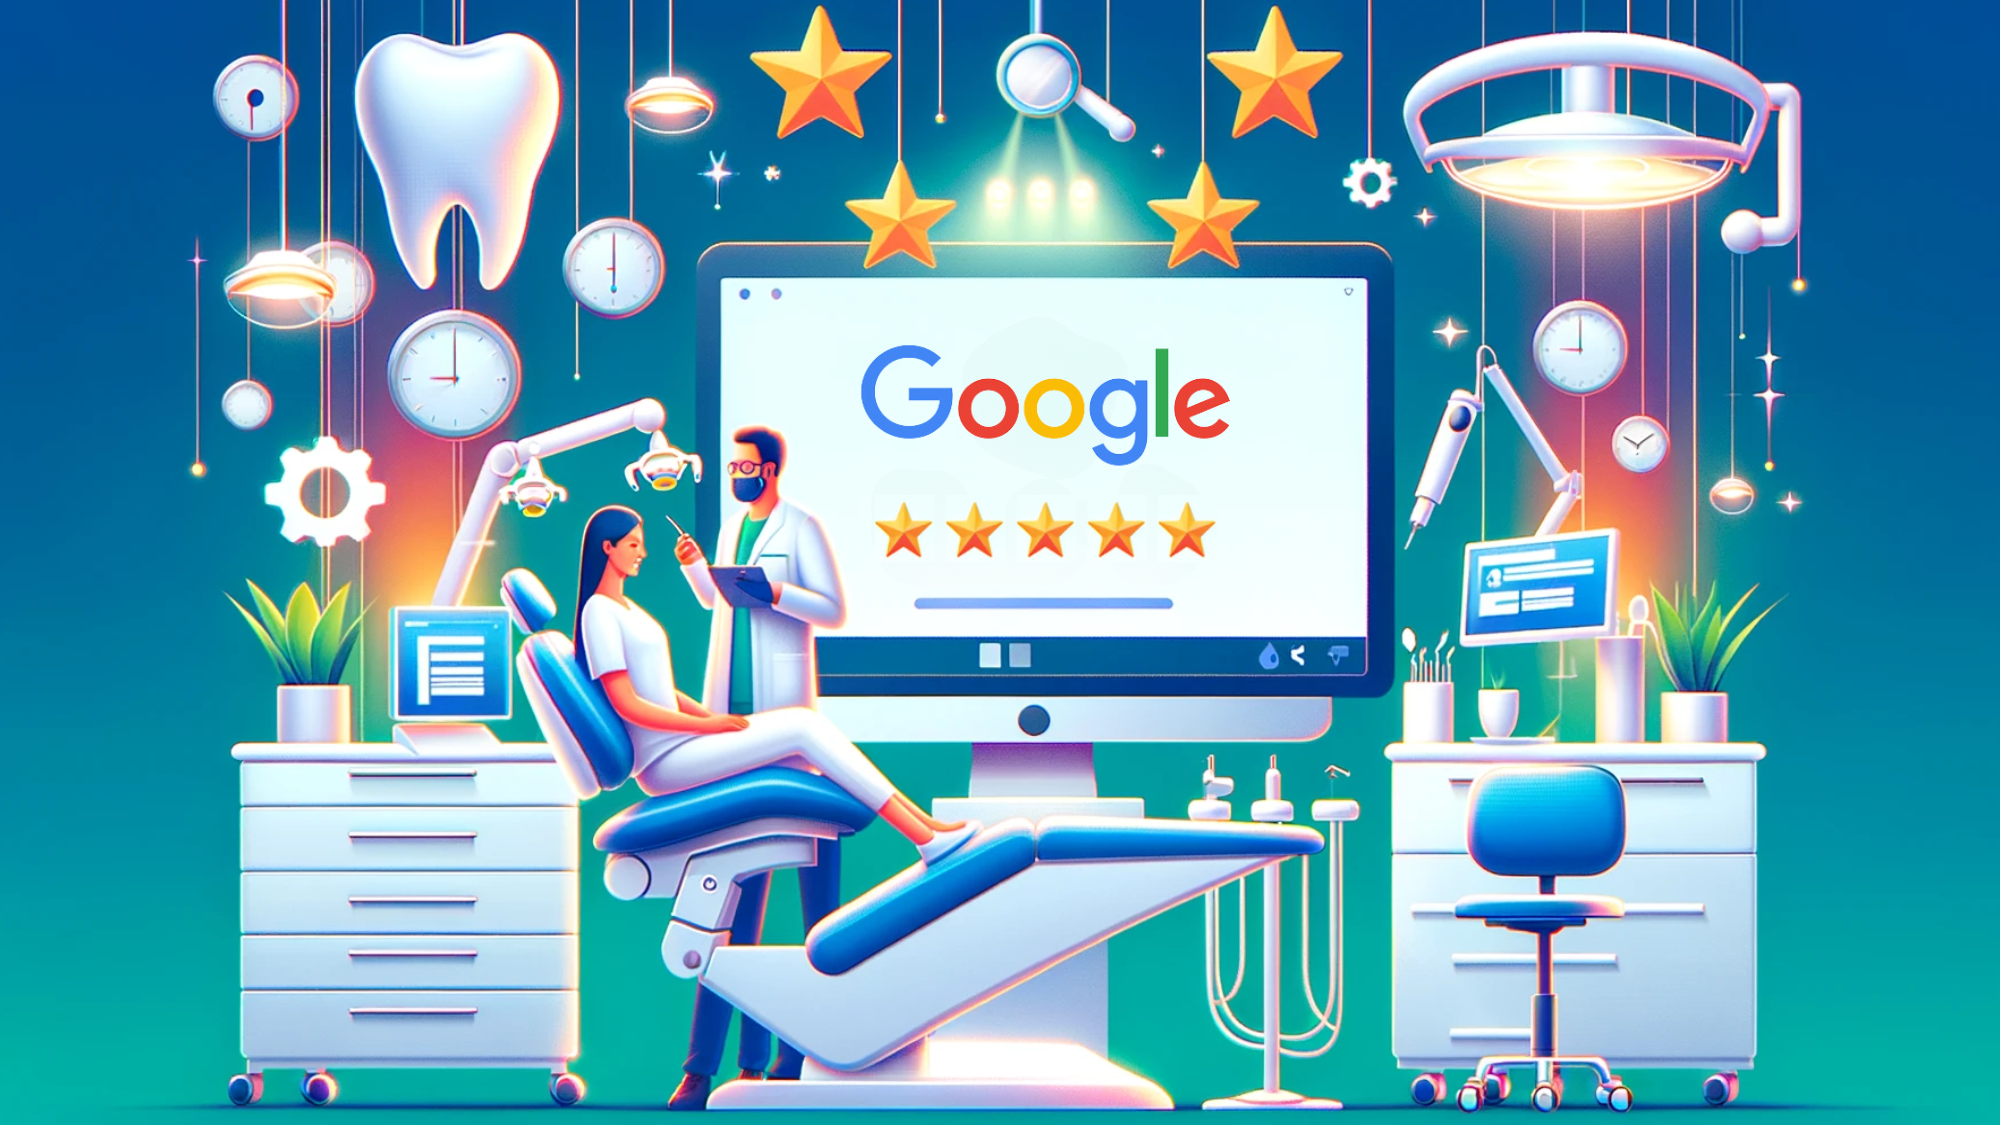 Modern dental clinic with a tablet showing 5-star Google reviews, indicating top patient care